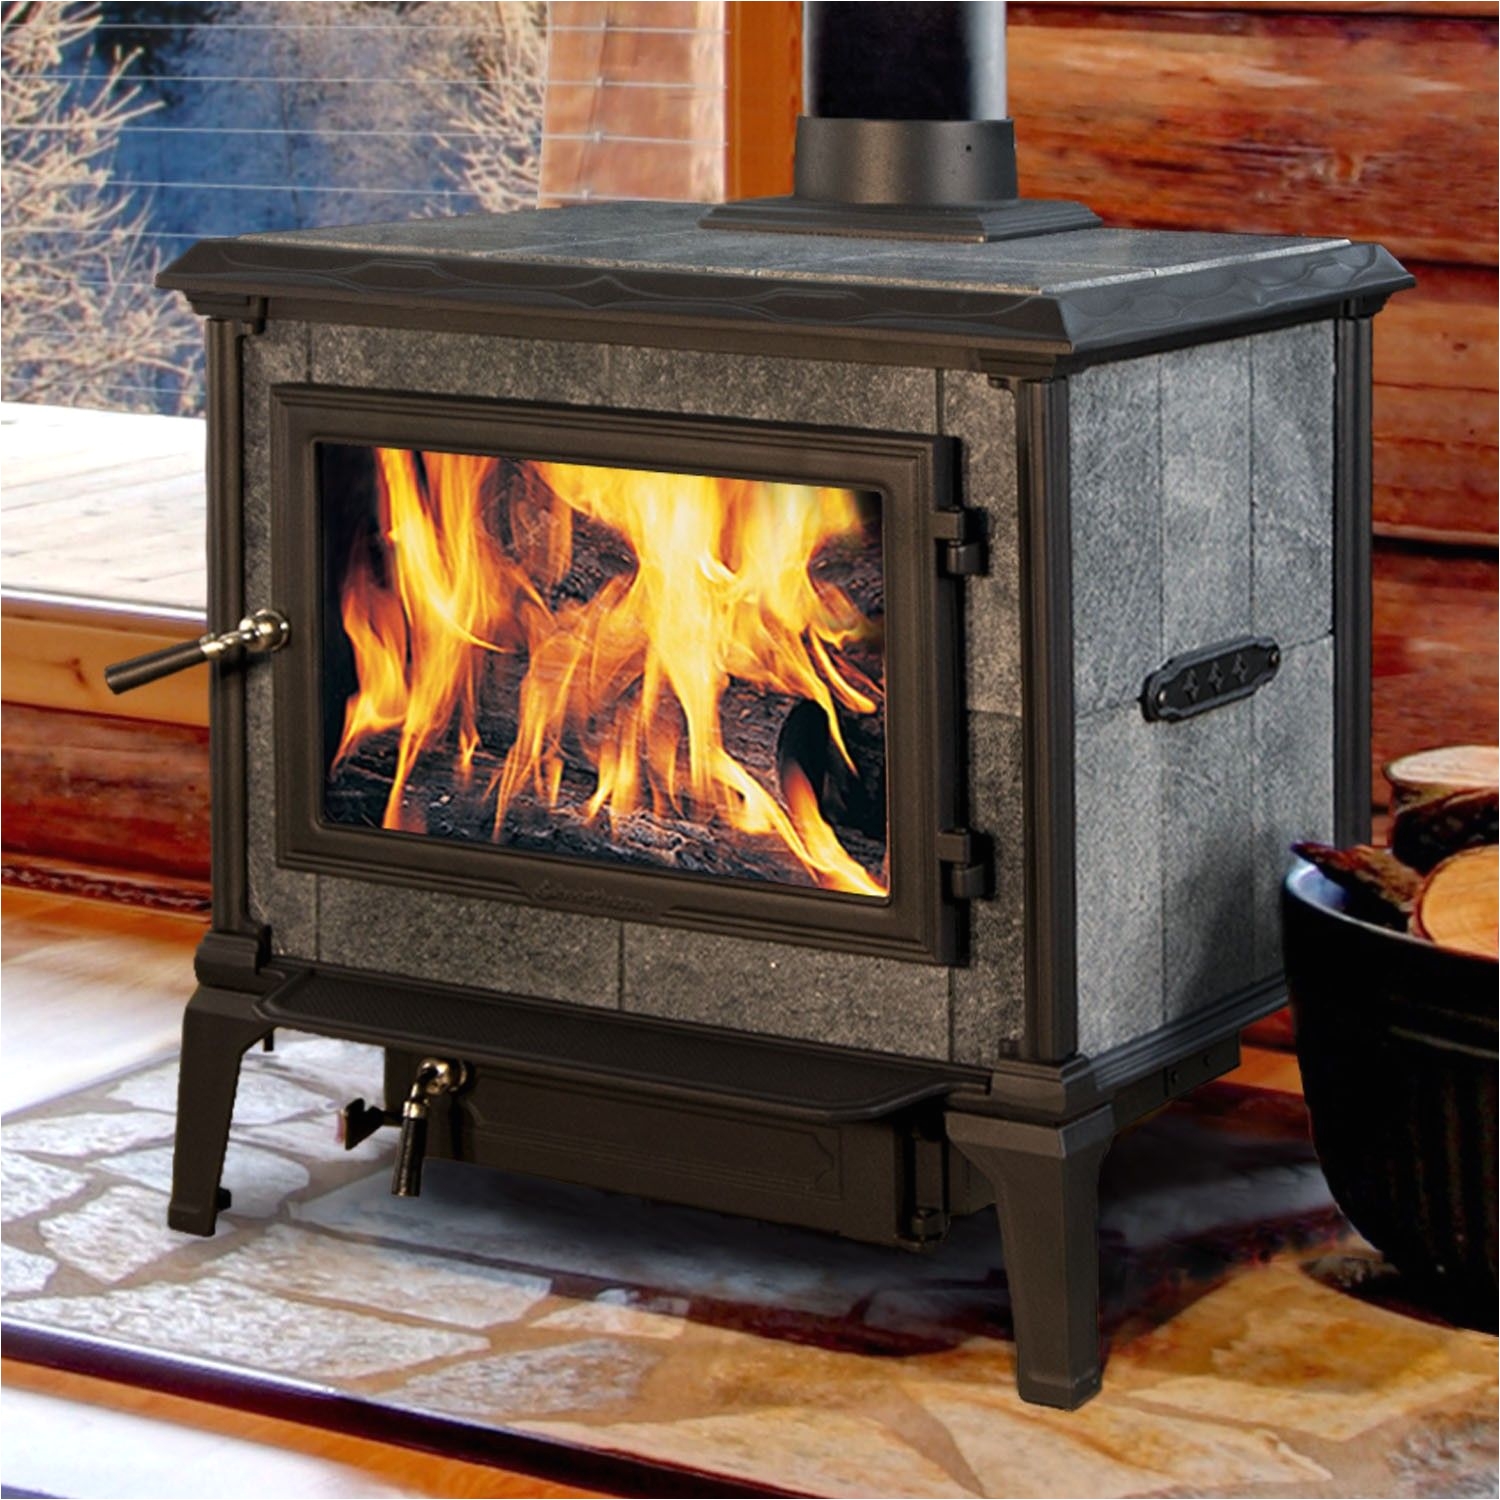 mansfield 8012 wood stove by hearthstone heats up to 2500 sq ft available from rich s for the home http www richshome com